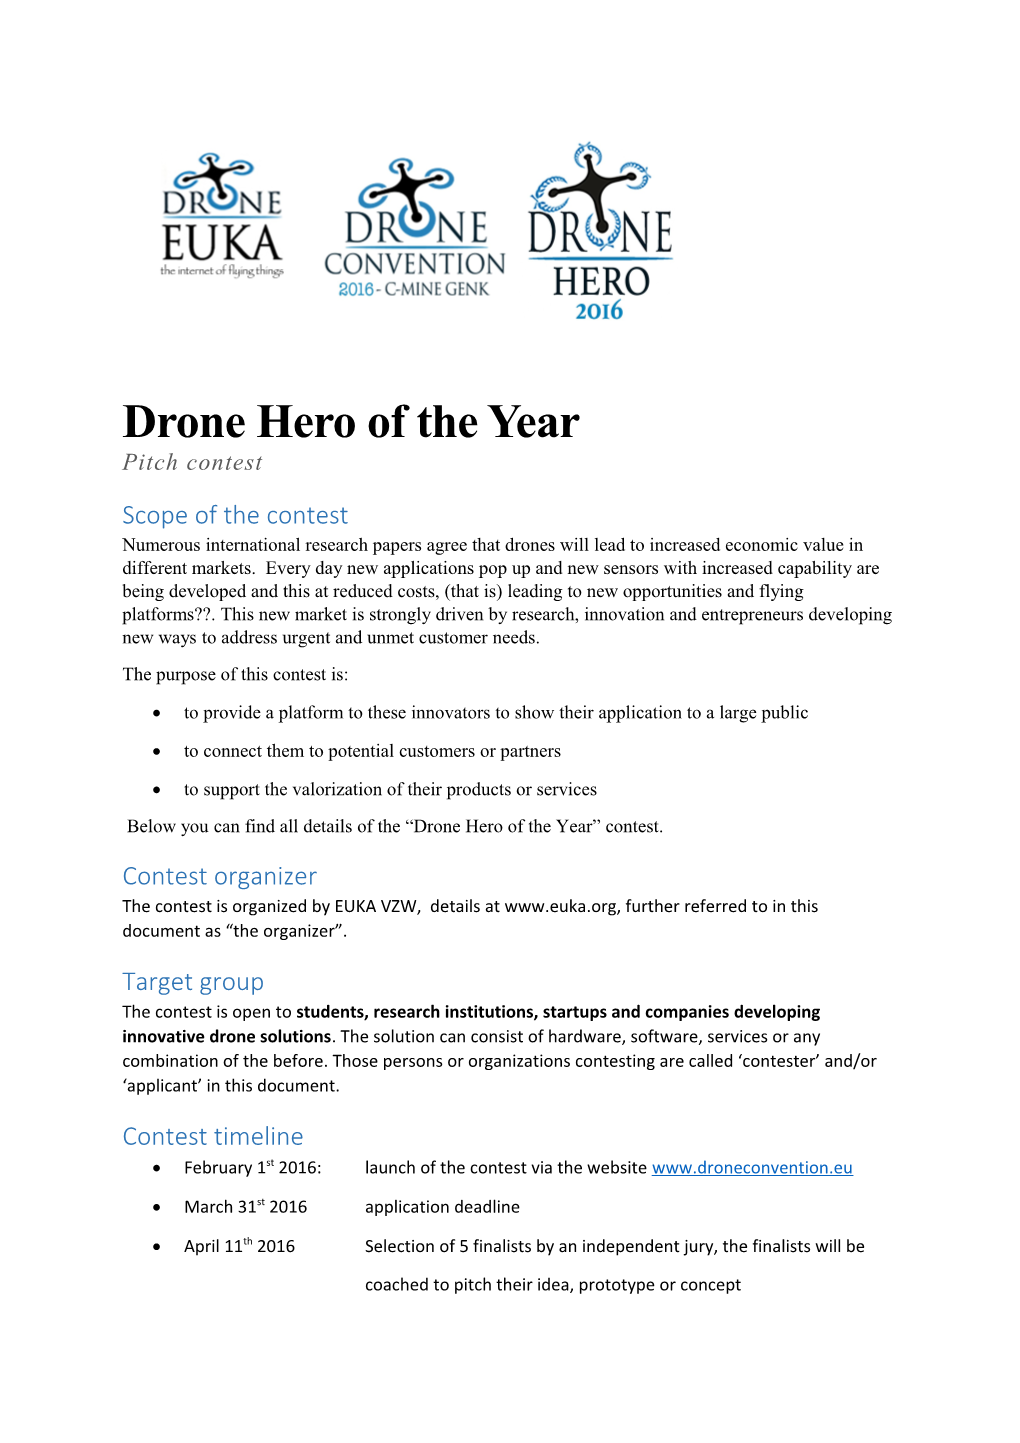 Drone Hero of the Year